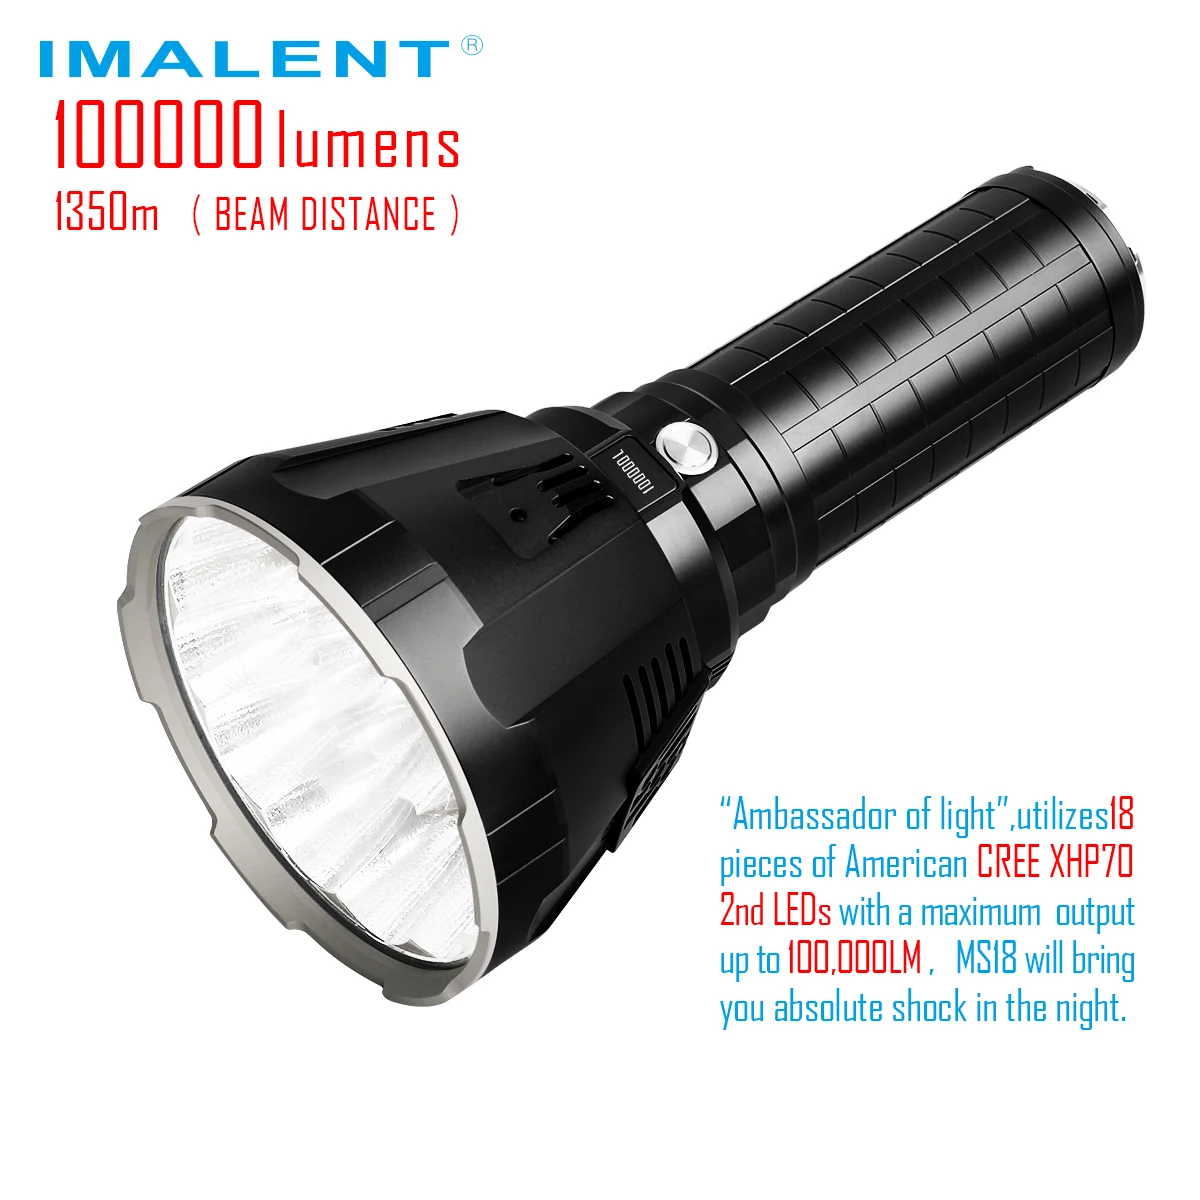 IMALENT MS18 Brightest Flashlight 100000 Lumens Rechargeable Cree XHP70.2High Power Led Emergency Flashlights Convoy Camping